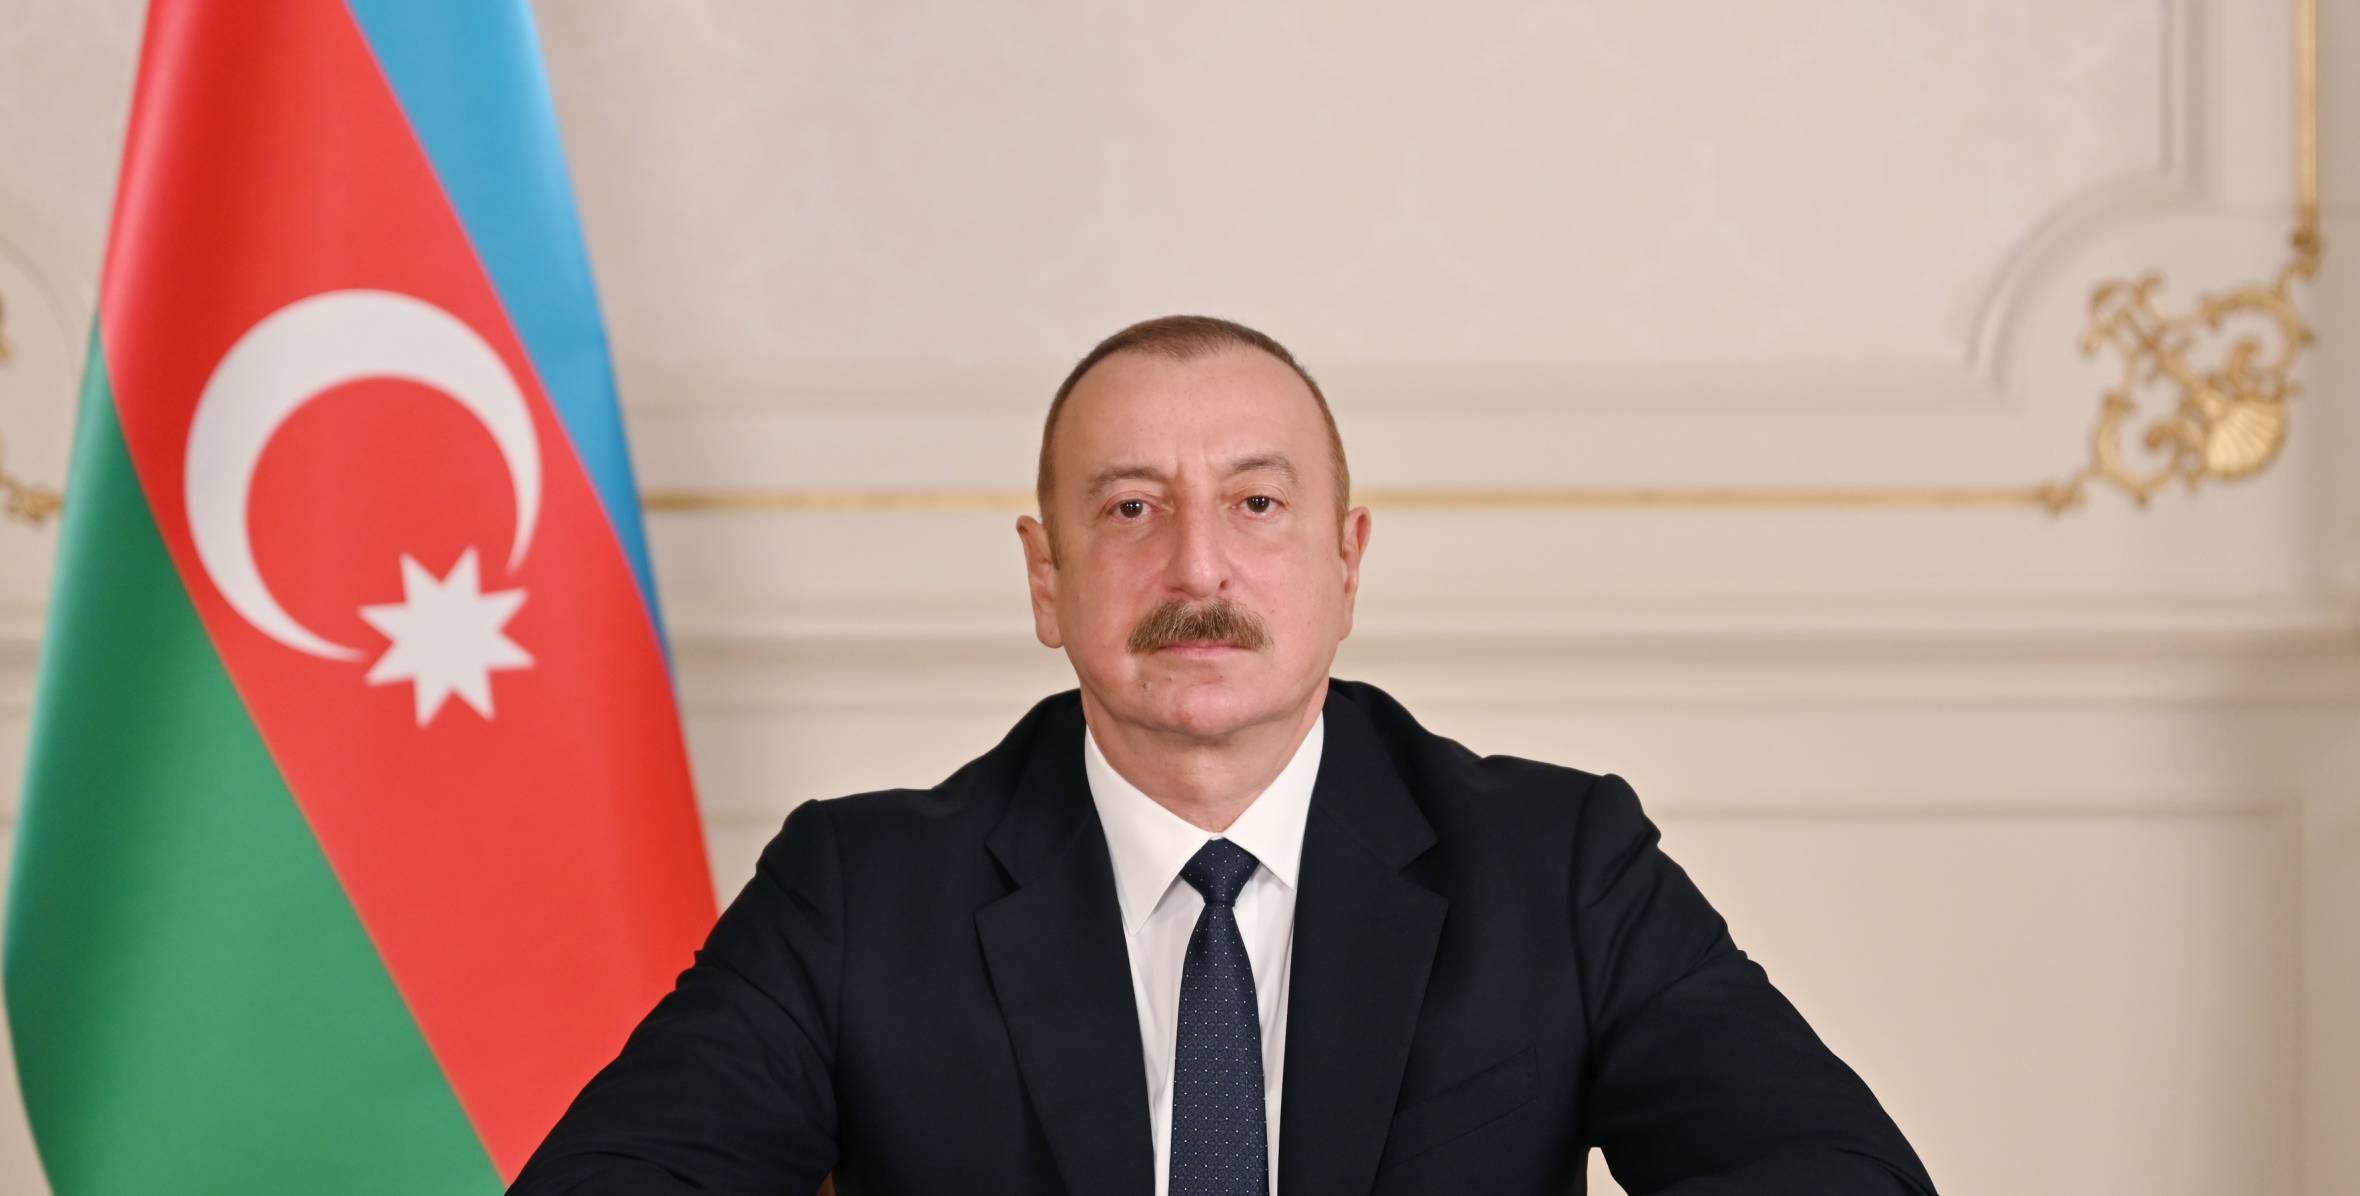 Address of President of the Republic of Azerbaijan Ilham Aliyev on the occasion of the Day of Solidarity of World Azerbaijanis and the New Year